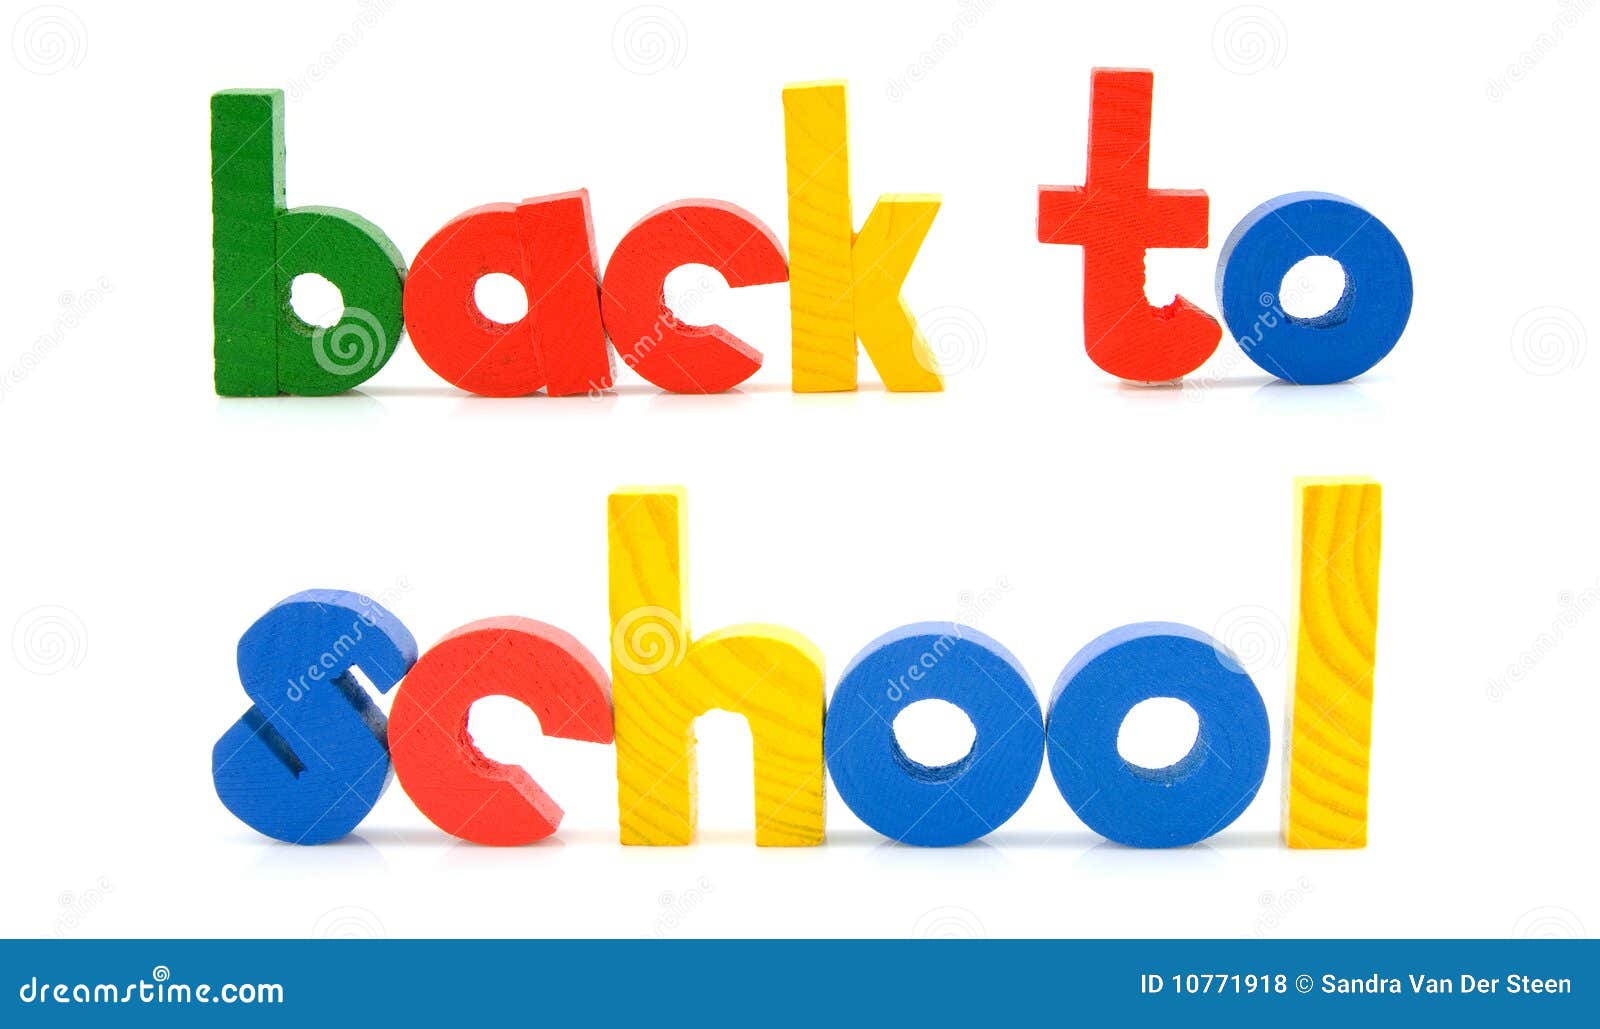 sentence back to school in wooden colorful letters